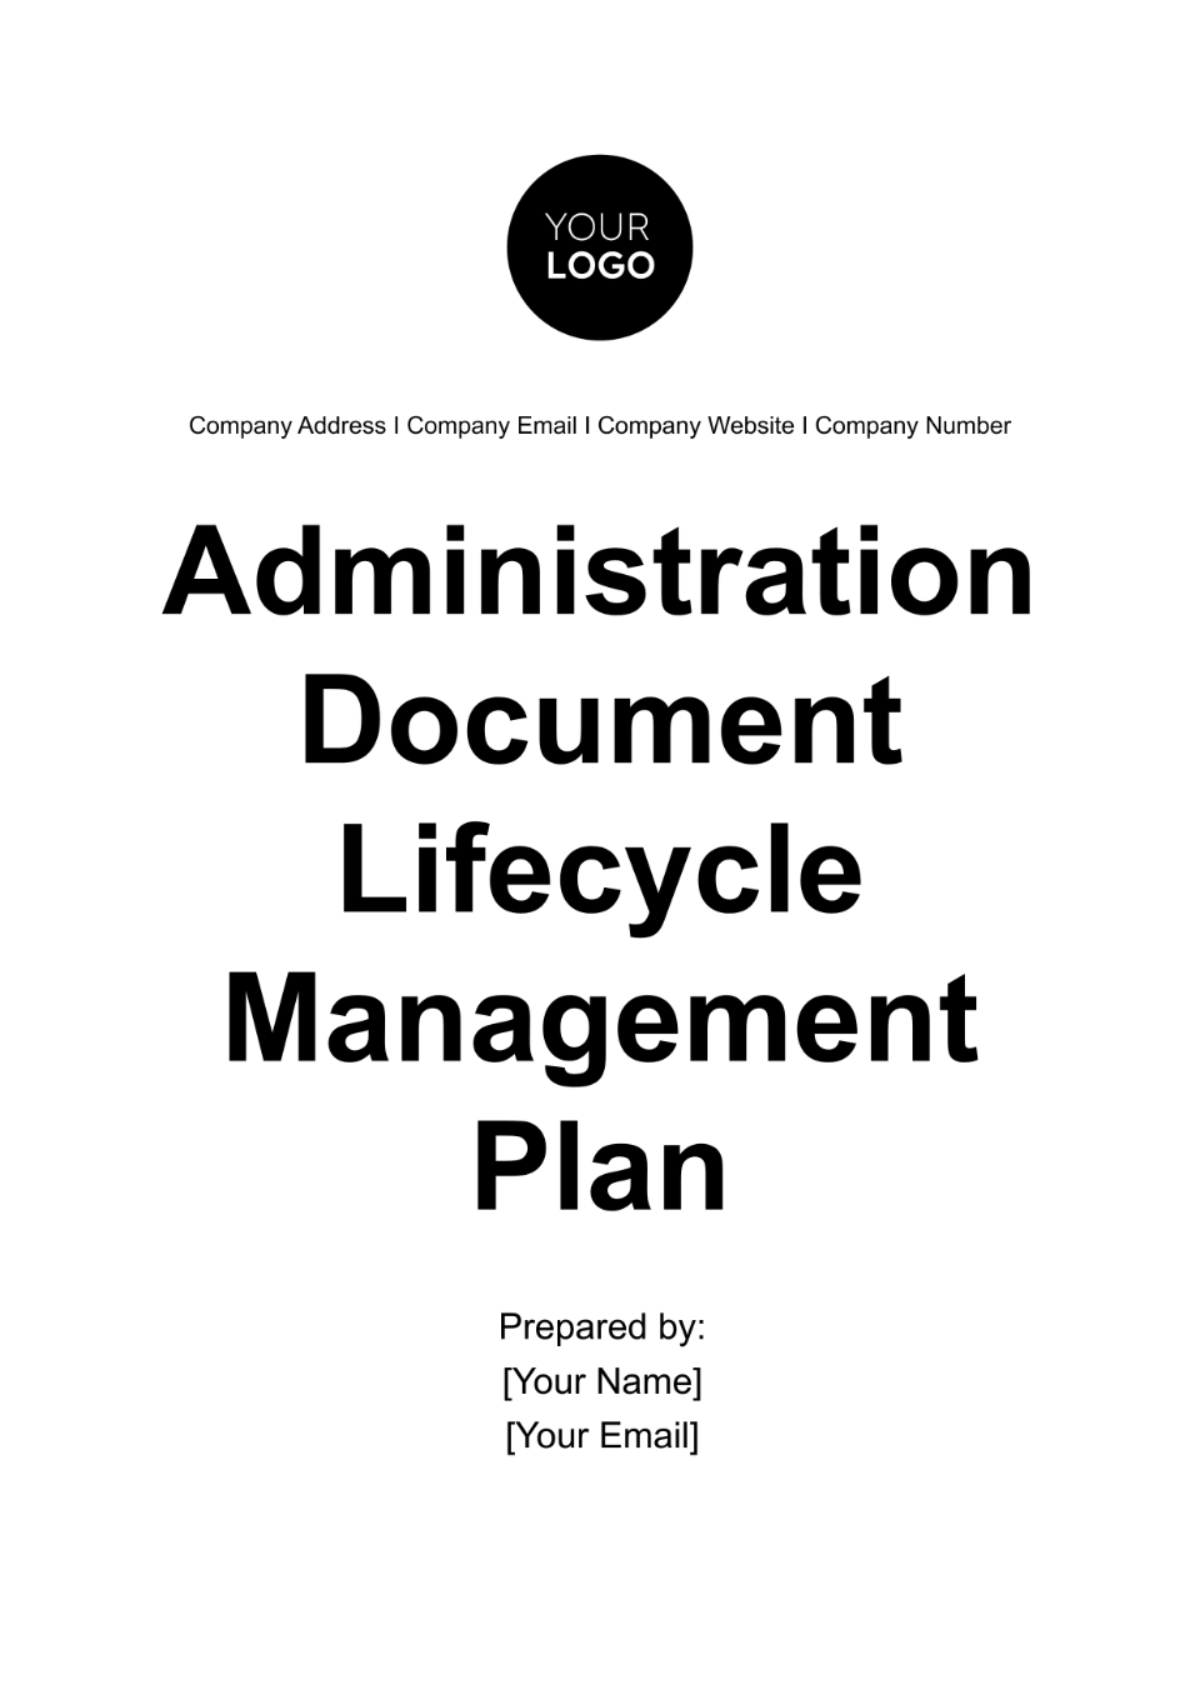 Administration Document Lifecycle Management Plan Template